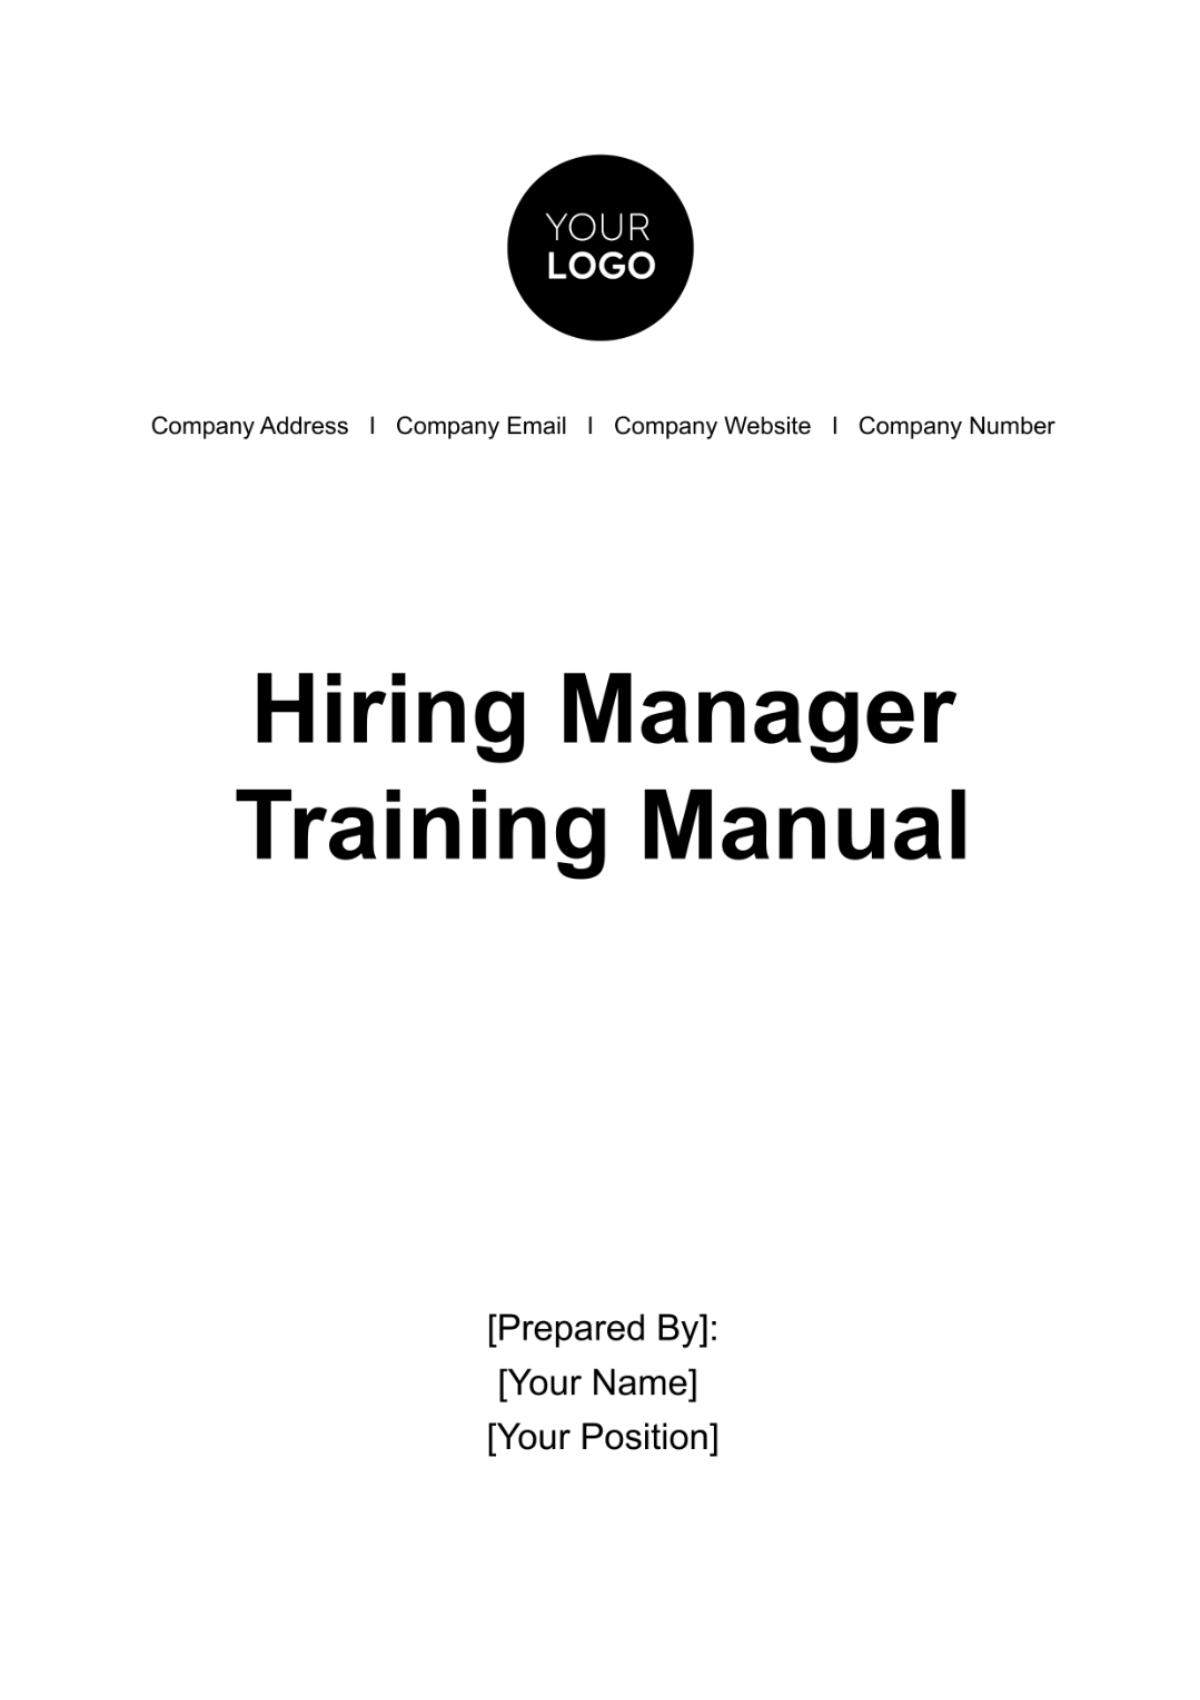 Hiring Manager Training Manual HR Template